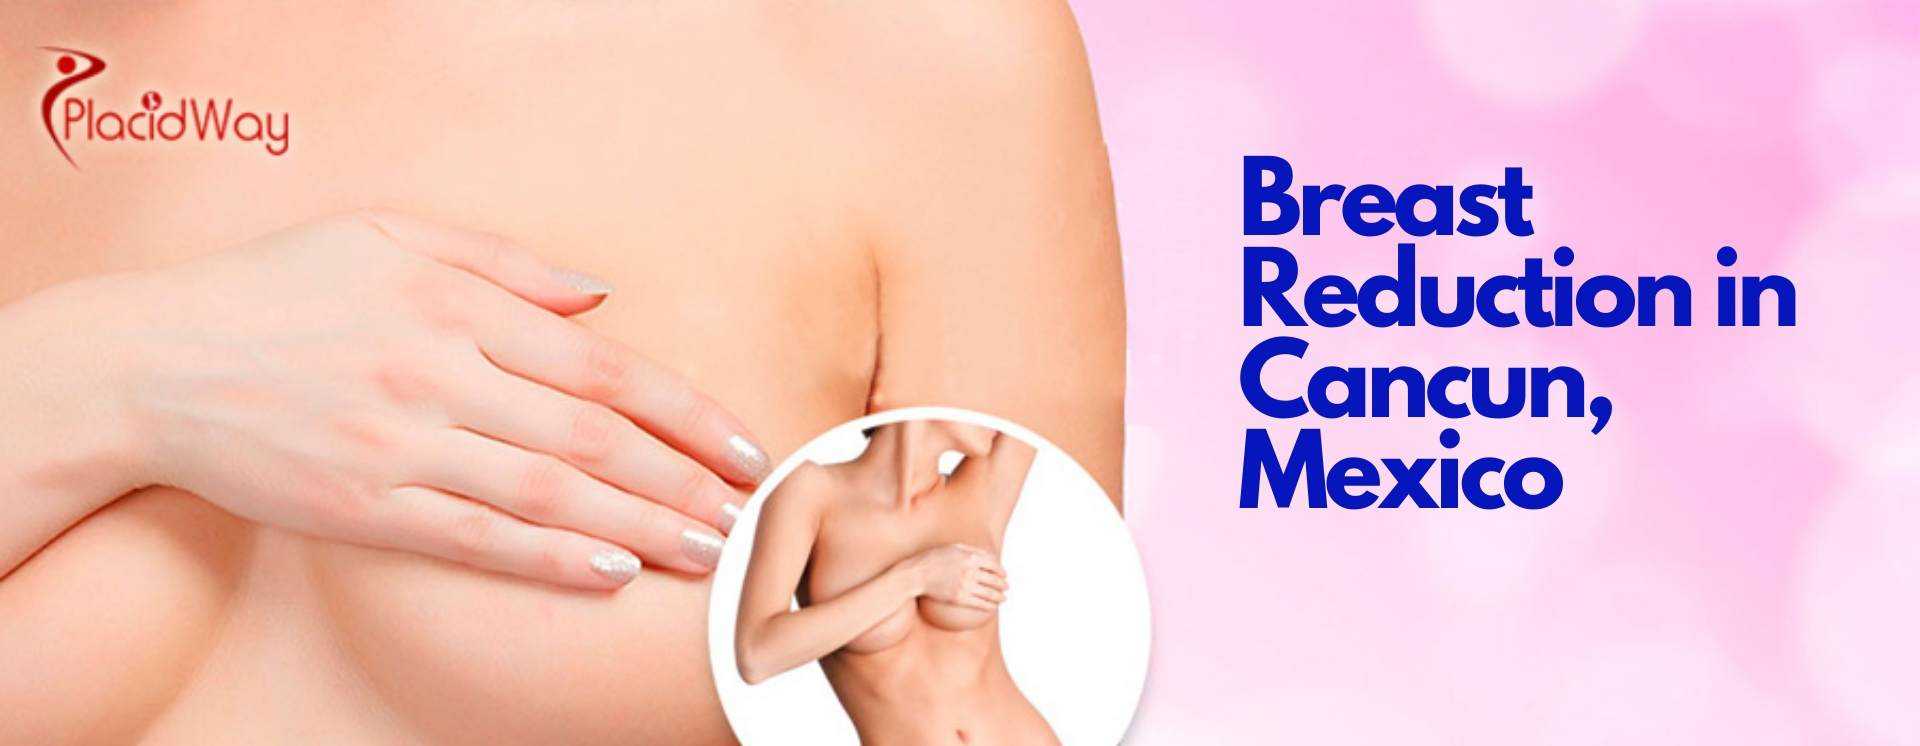 Breast Reduction in Cancun Mexico